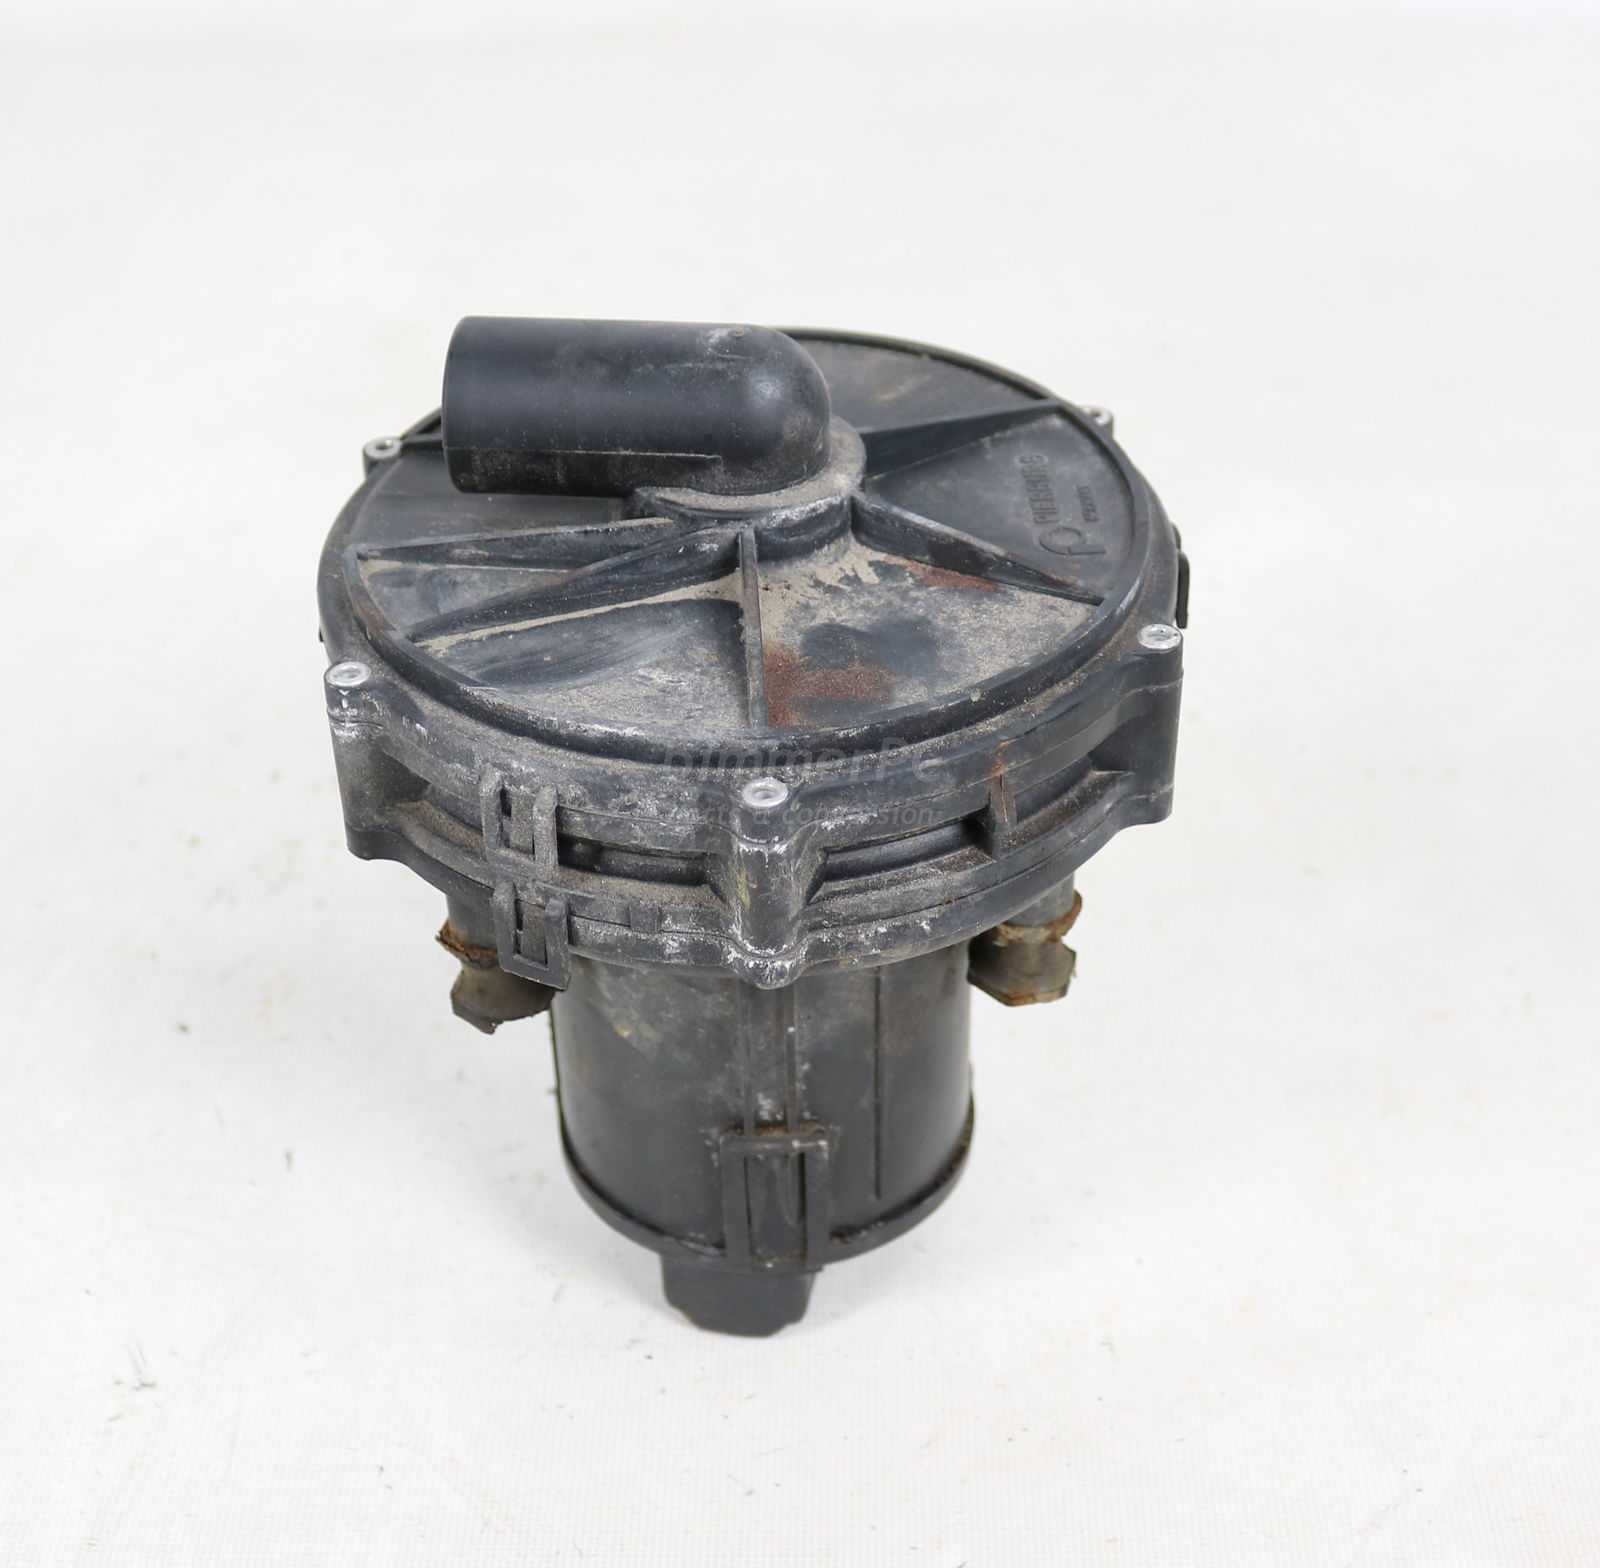 Picture of BMW 11721707585 Secondary Air Injection Emissions Smog Pump E38 740iL 740i M62tu for sale